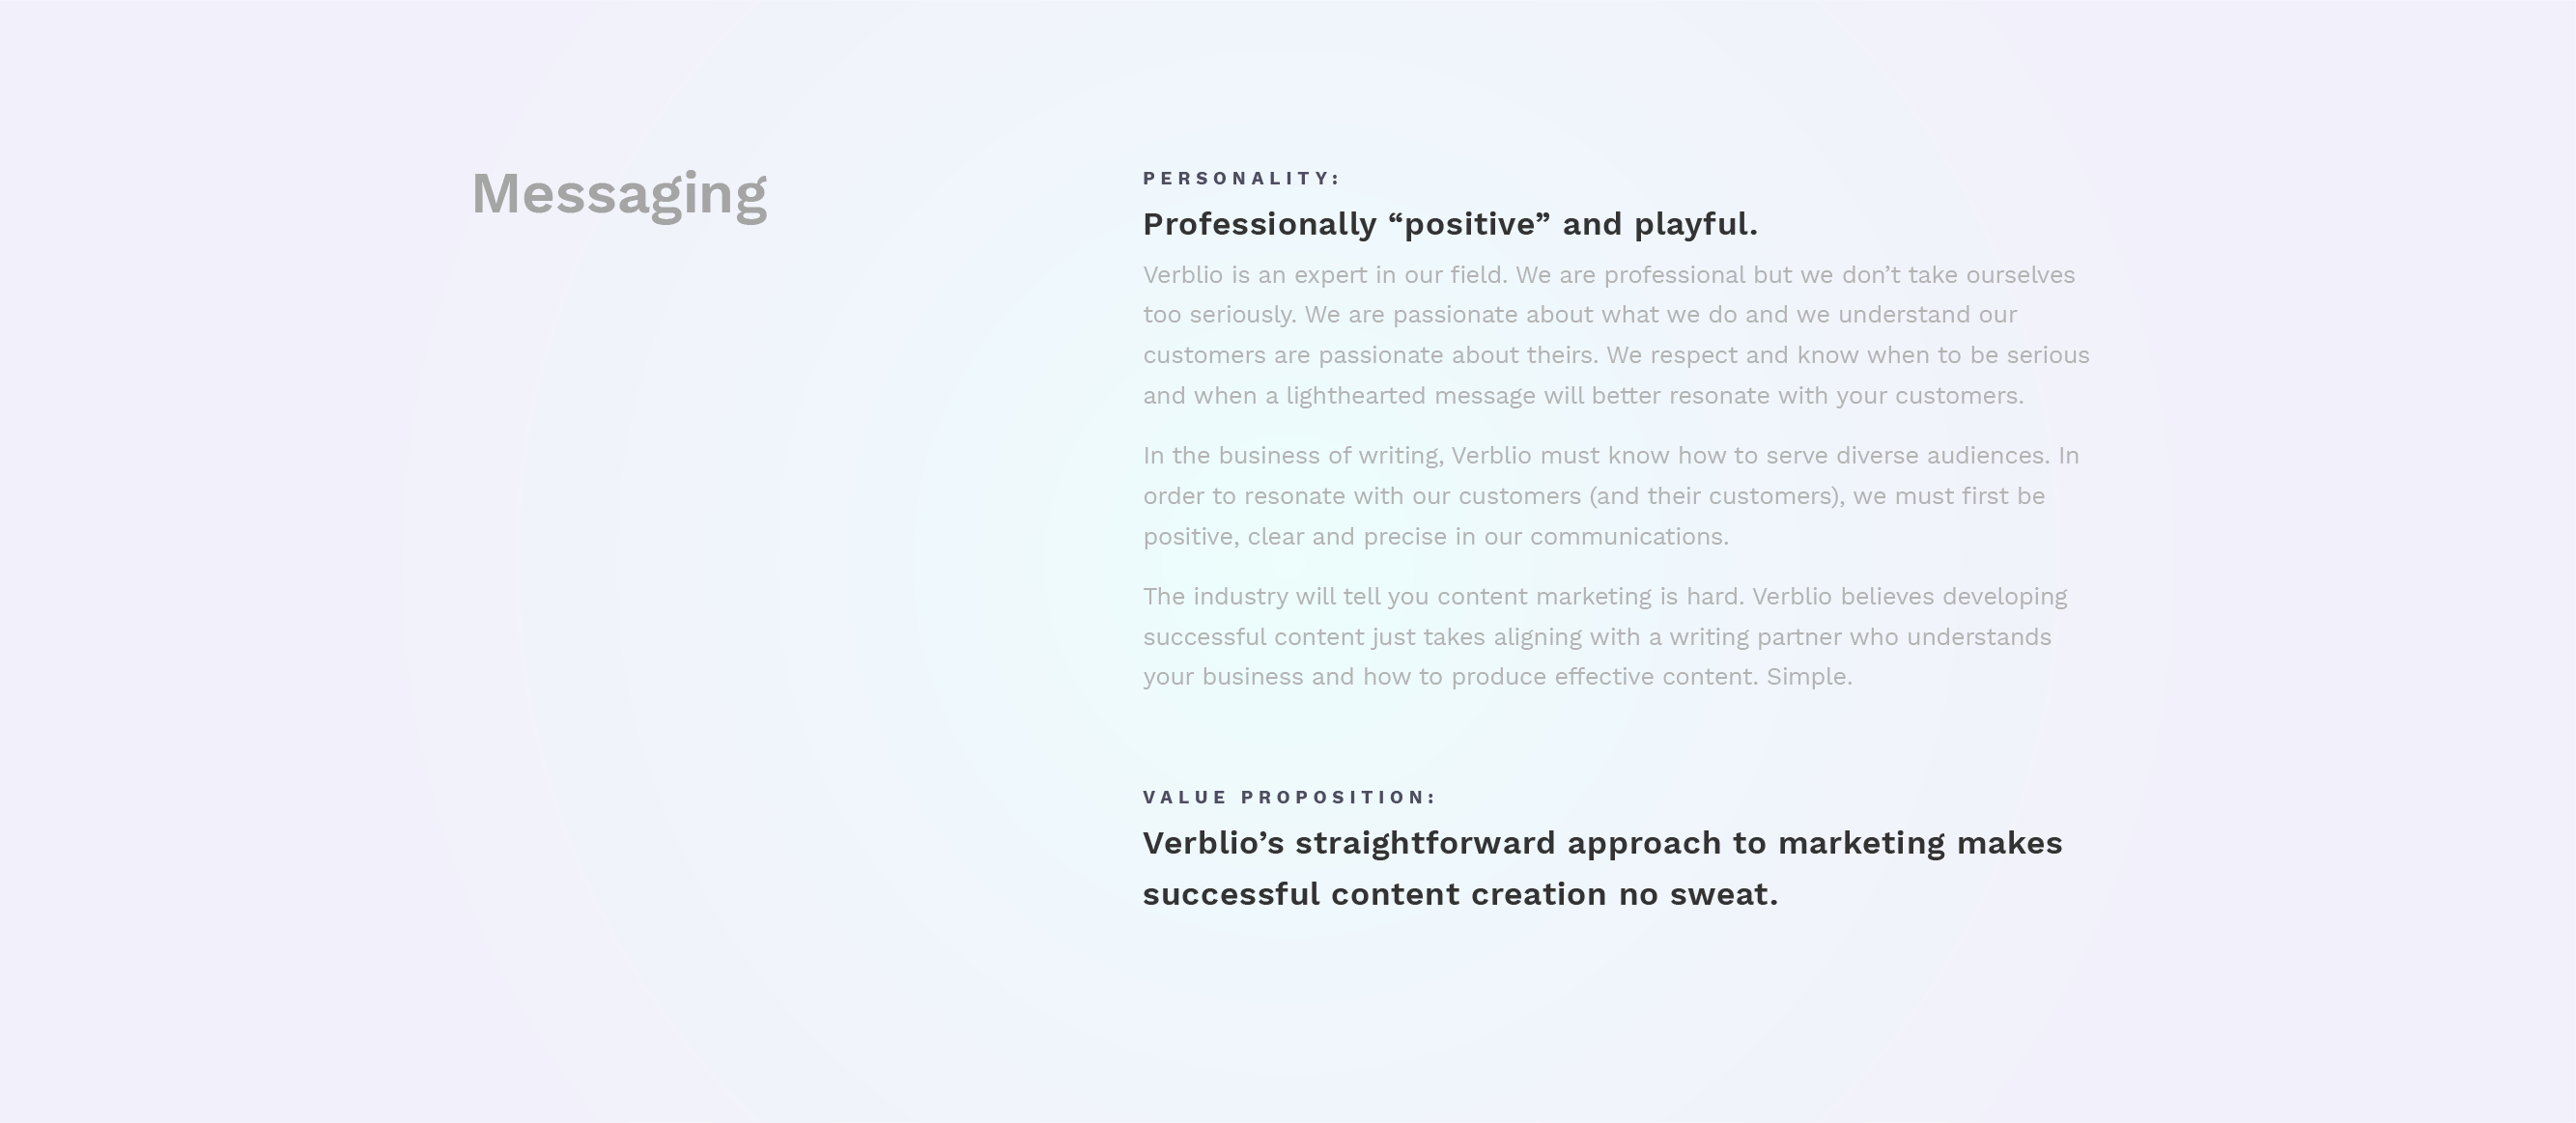 image of high level messaging concept for verblio brand